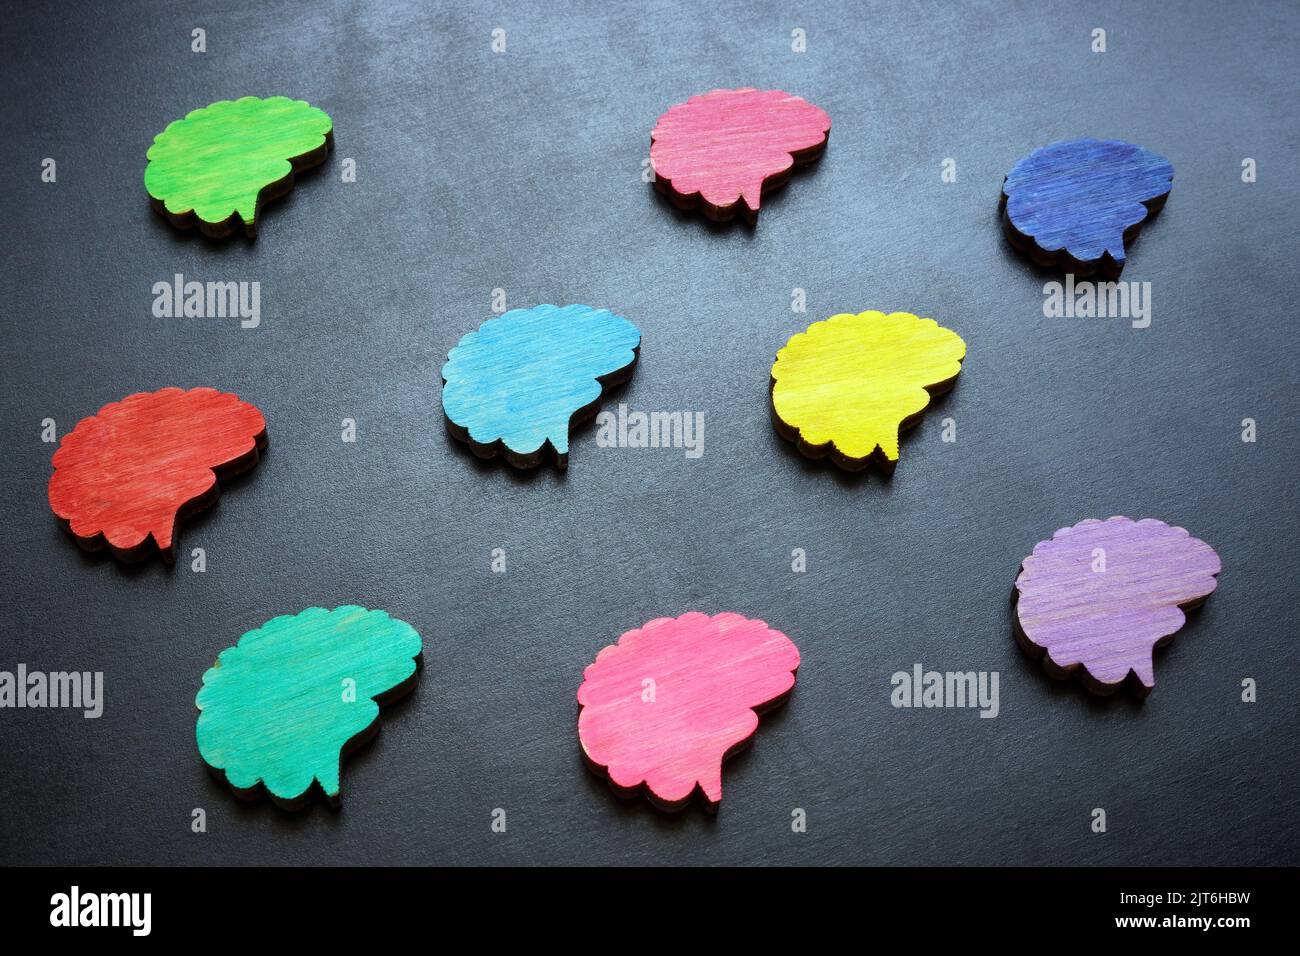 Neurodiversity concept. Multi-colored figures of the brain on a dark surface. Stock Photo